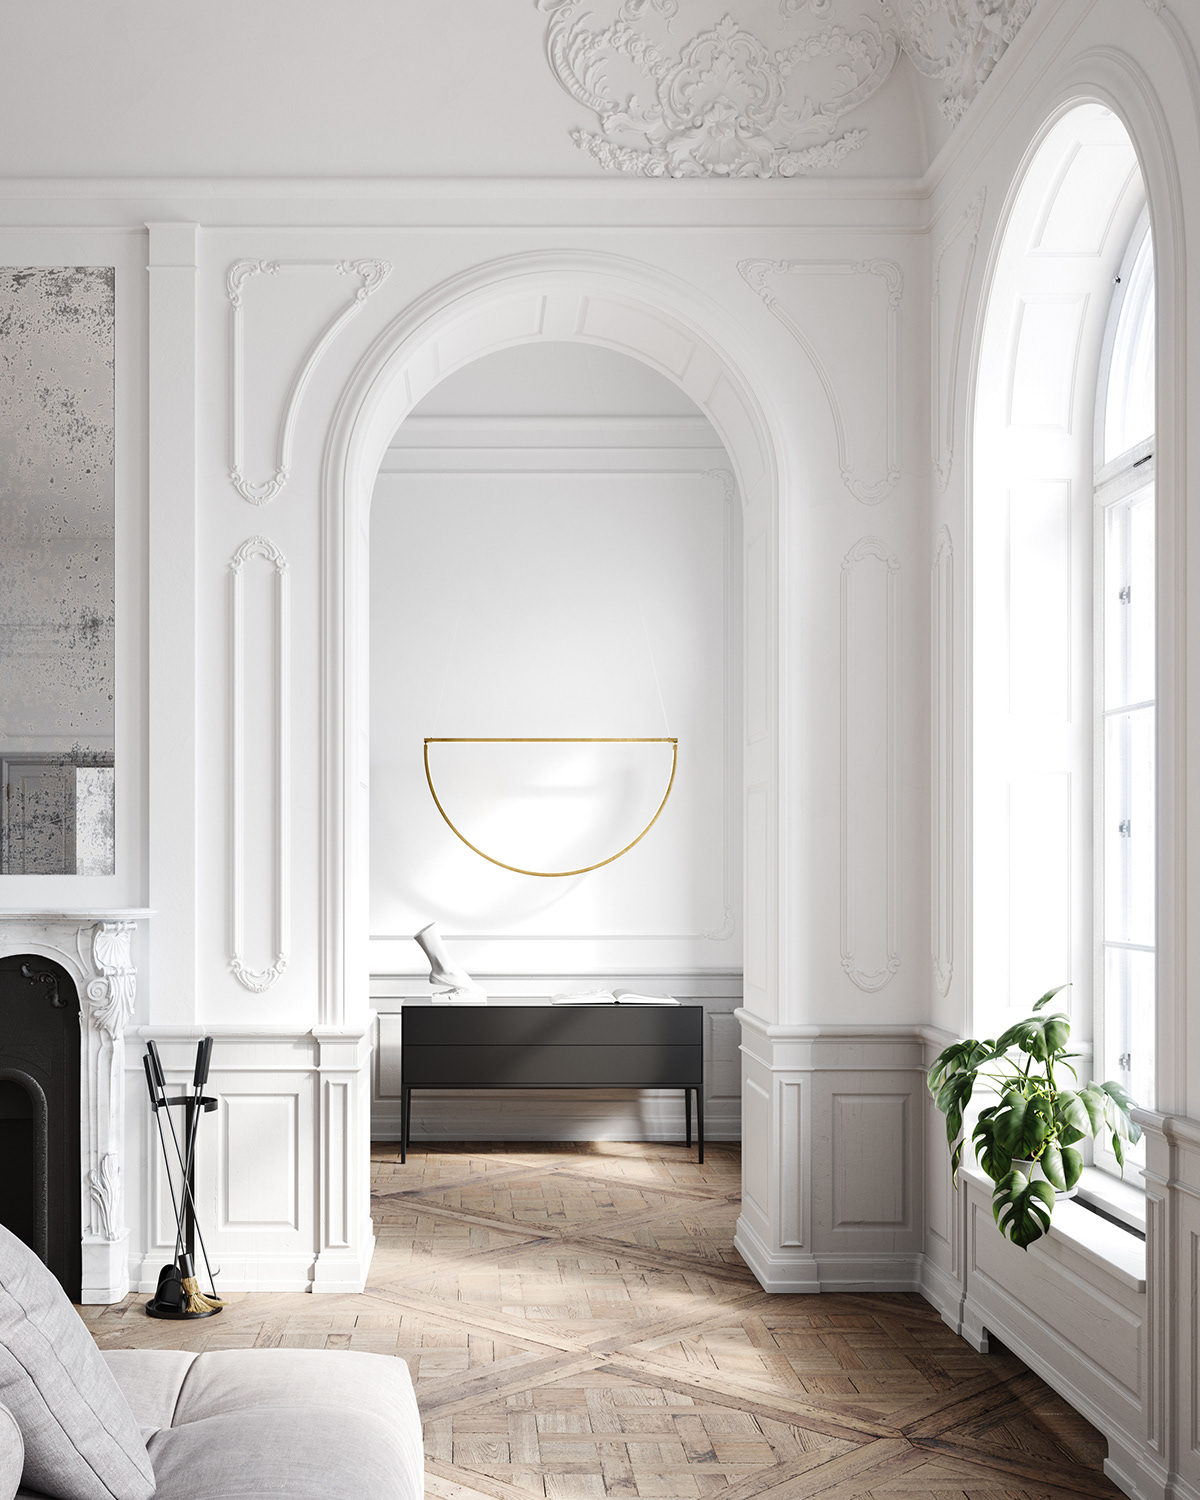 Décor Inspiration: Beautiful Renderings of a Classical Apartment